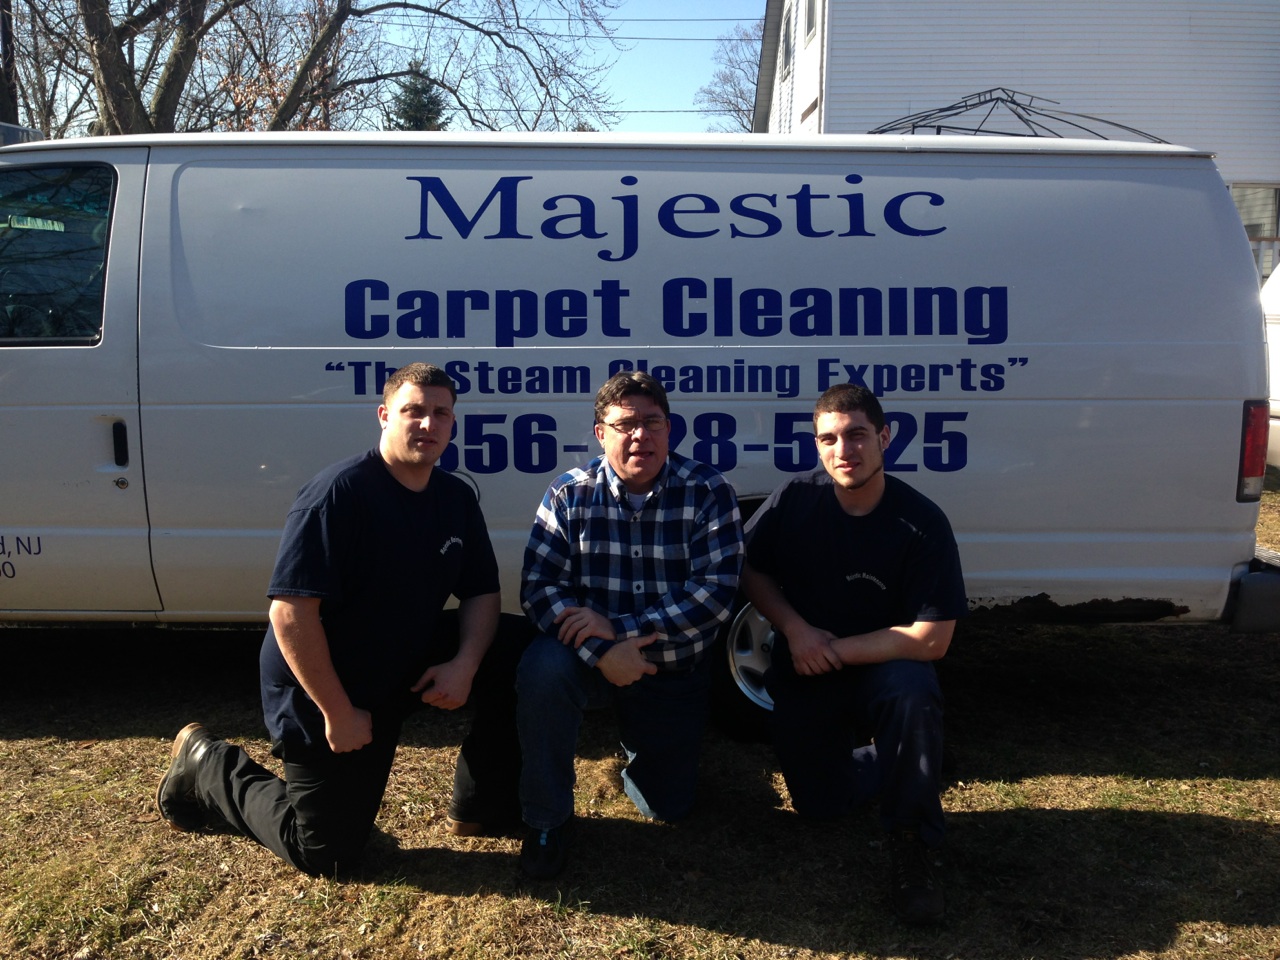 Transform Your Tiles Today with Majestic's Expert Tile and Grout Cleaning in NJ!